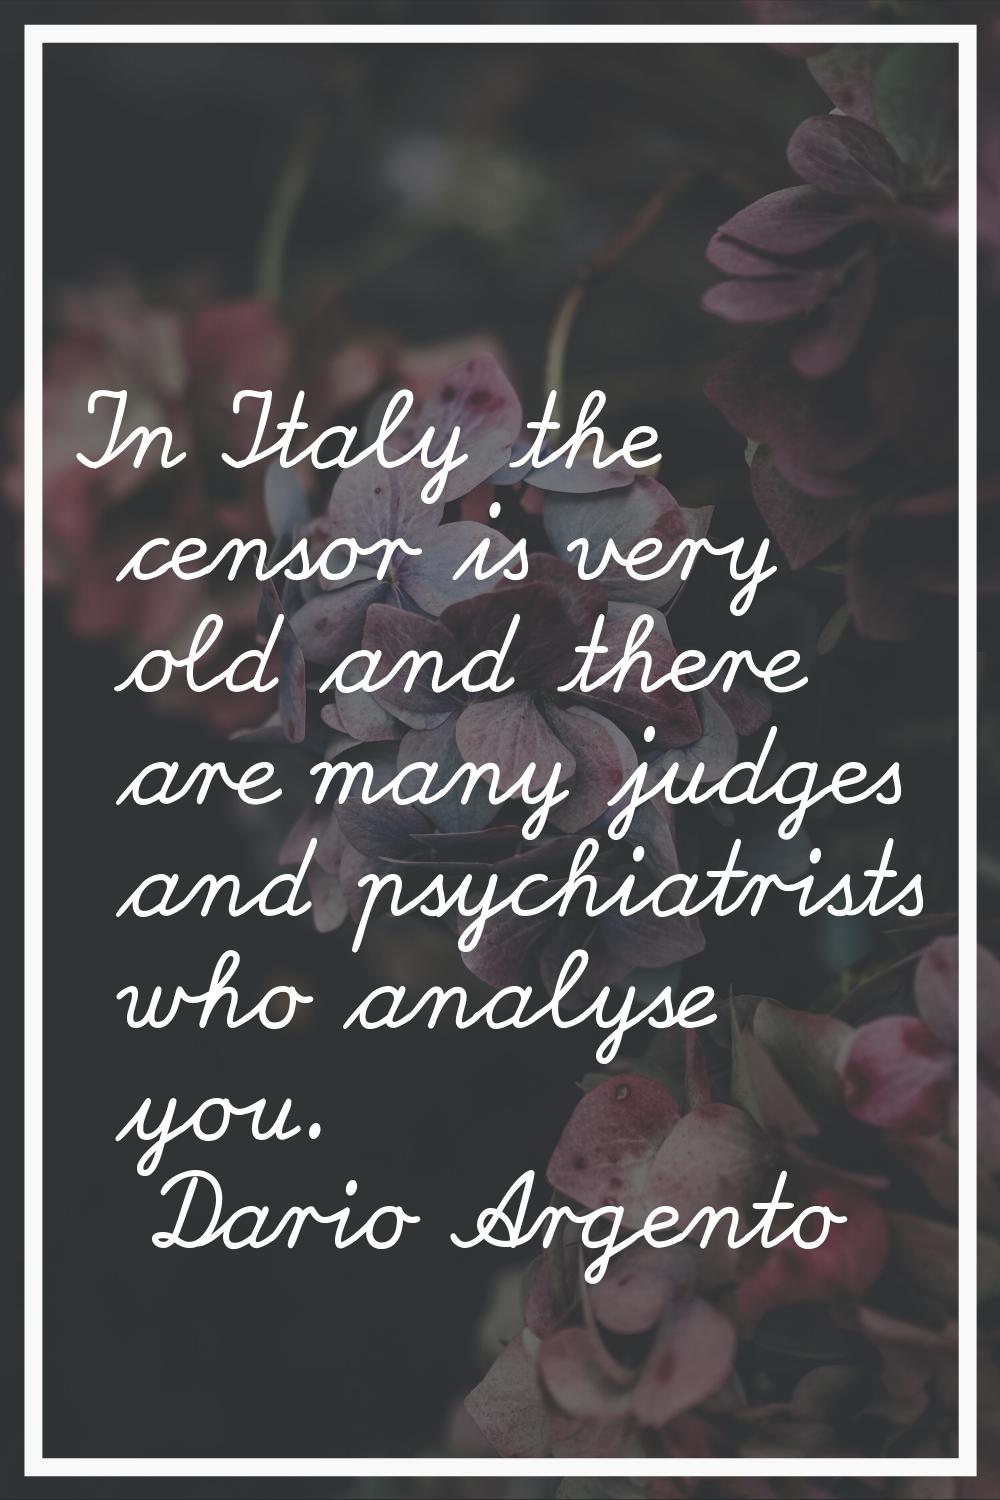 In Italy the censor is very old and there are many judges and psychiatrists who analyse you.